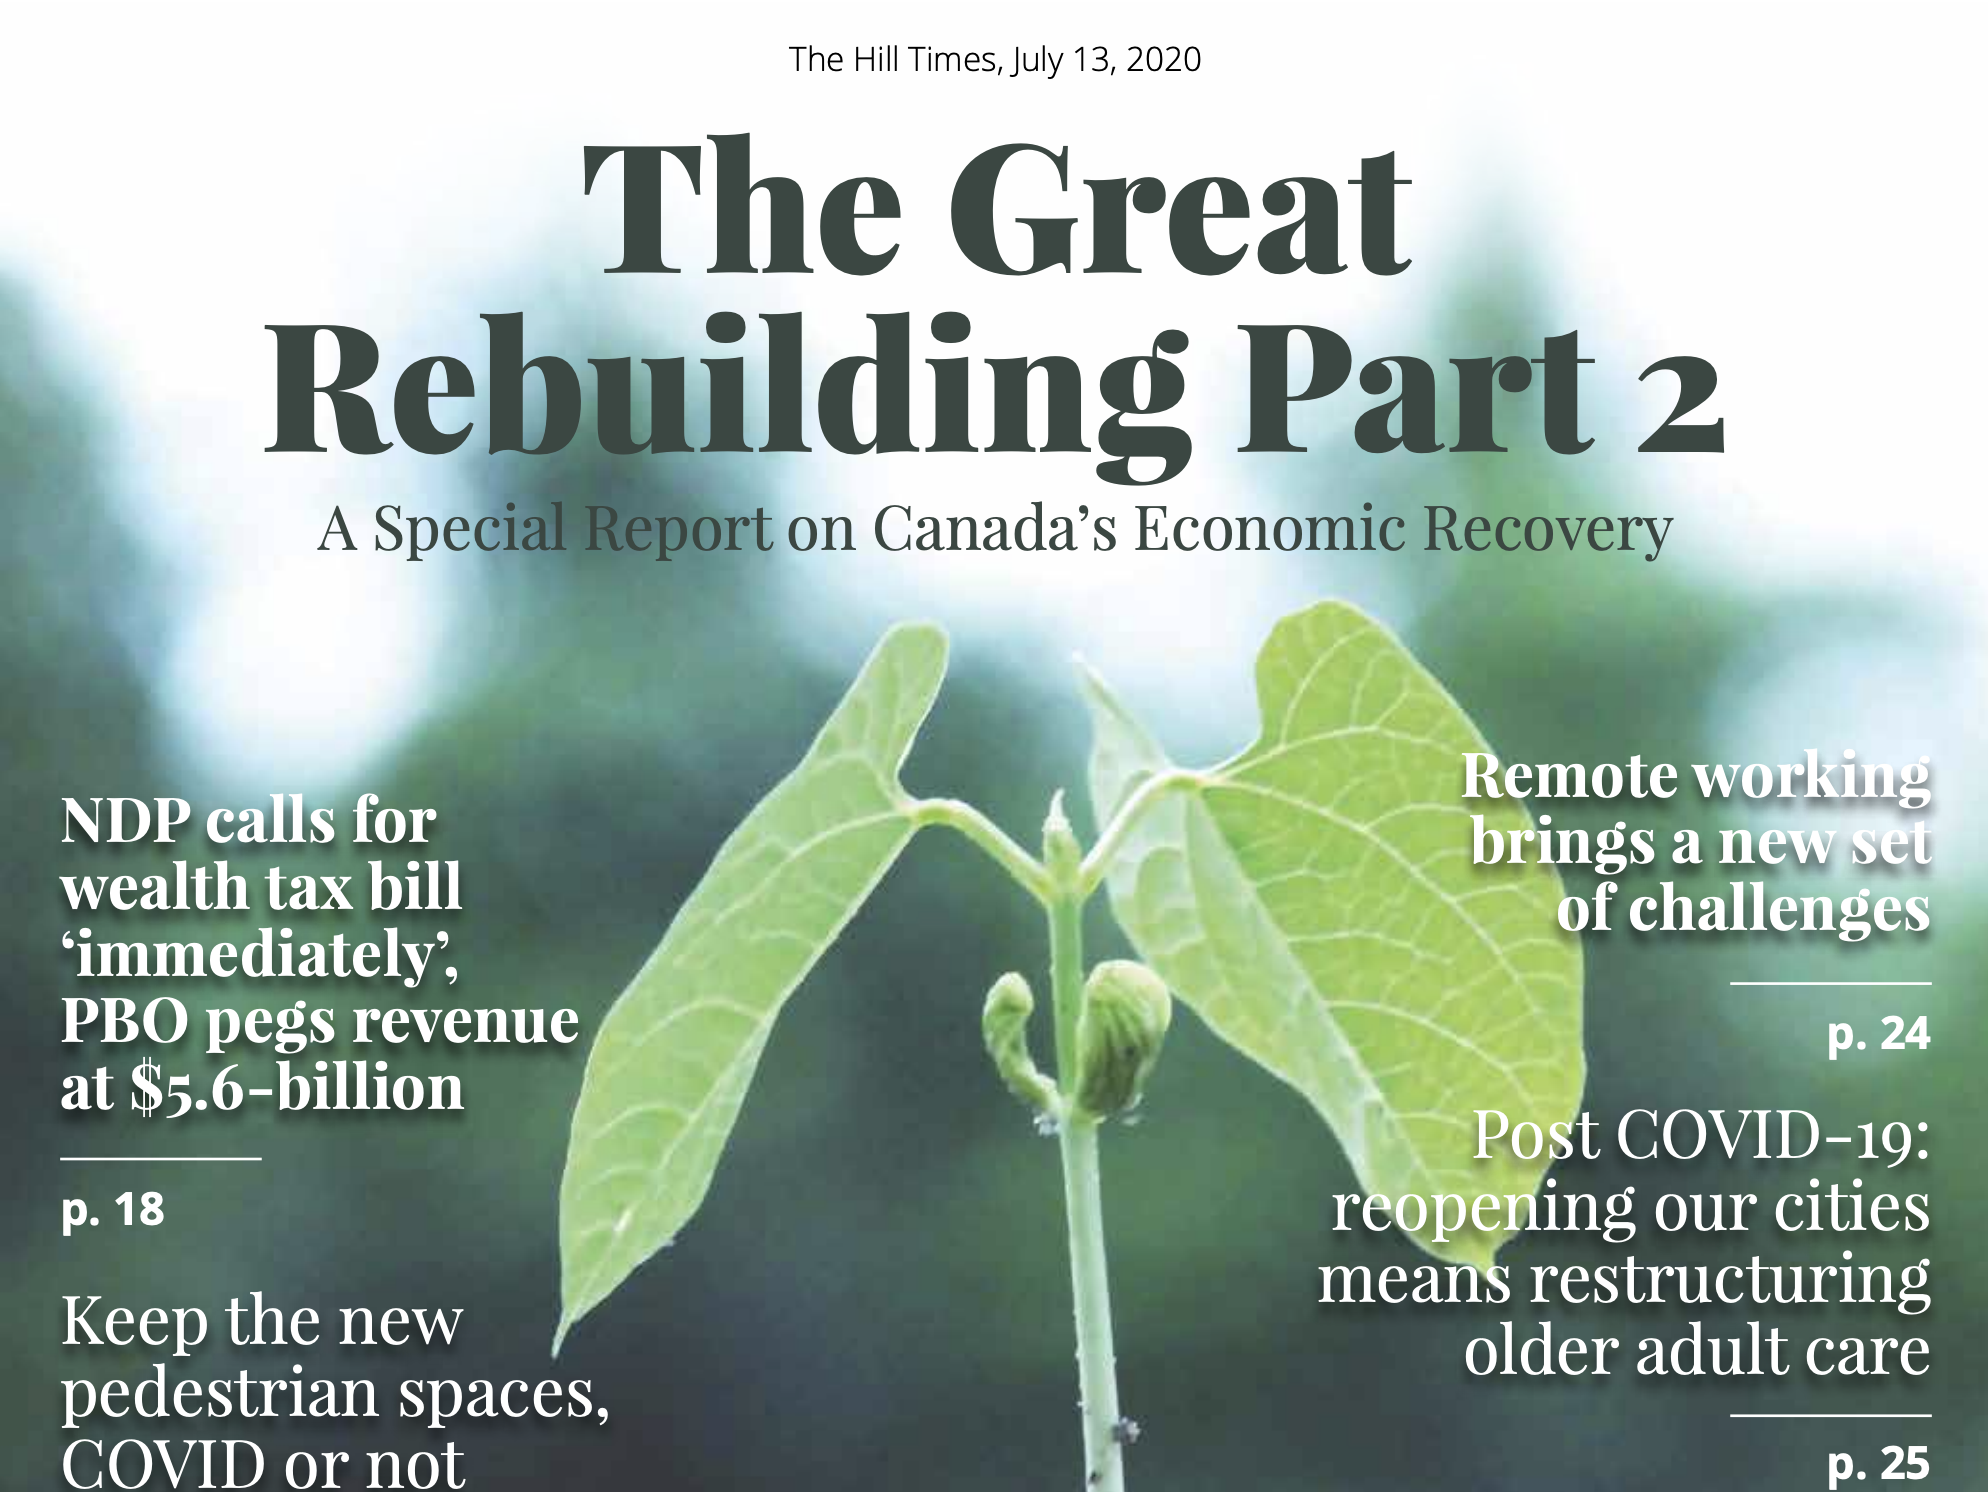 The Hill Times: Post COVID-19: reopening our cities means restructuring older adult care, July 13 2020 